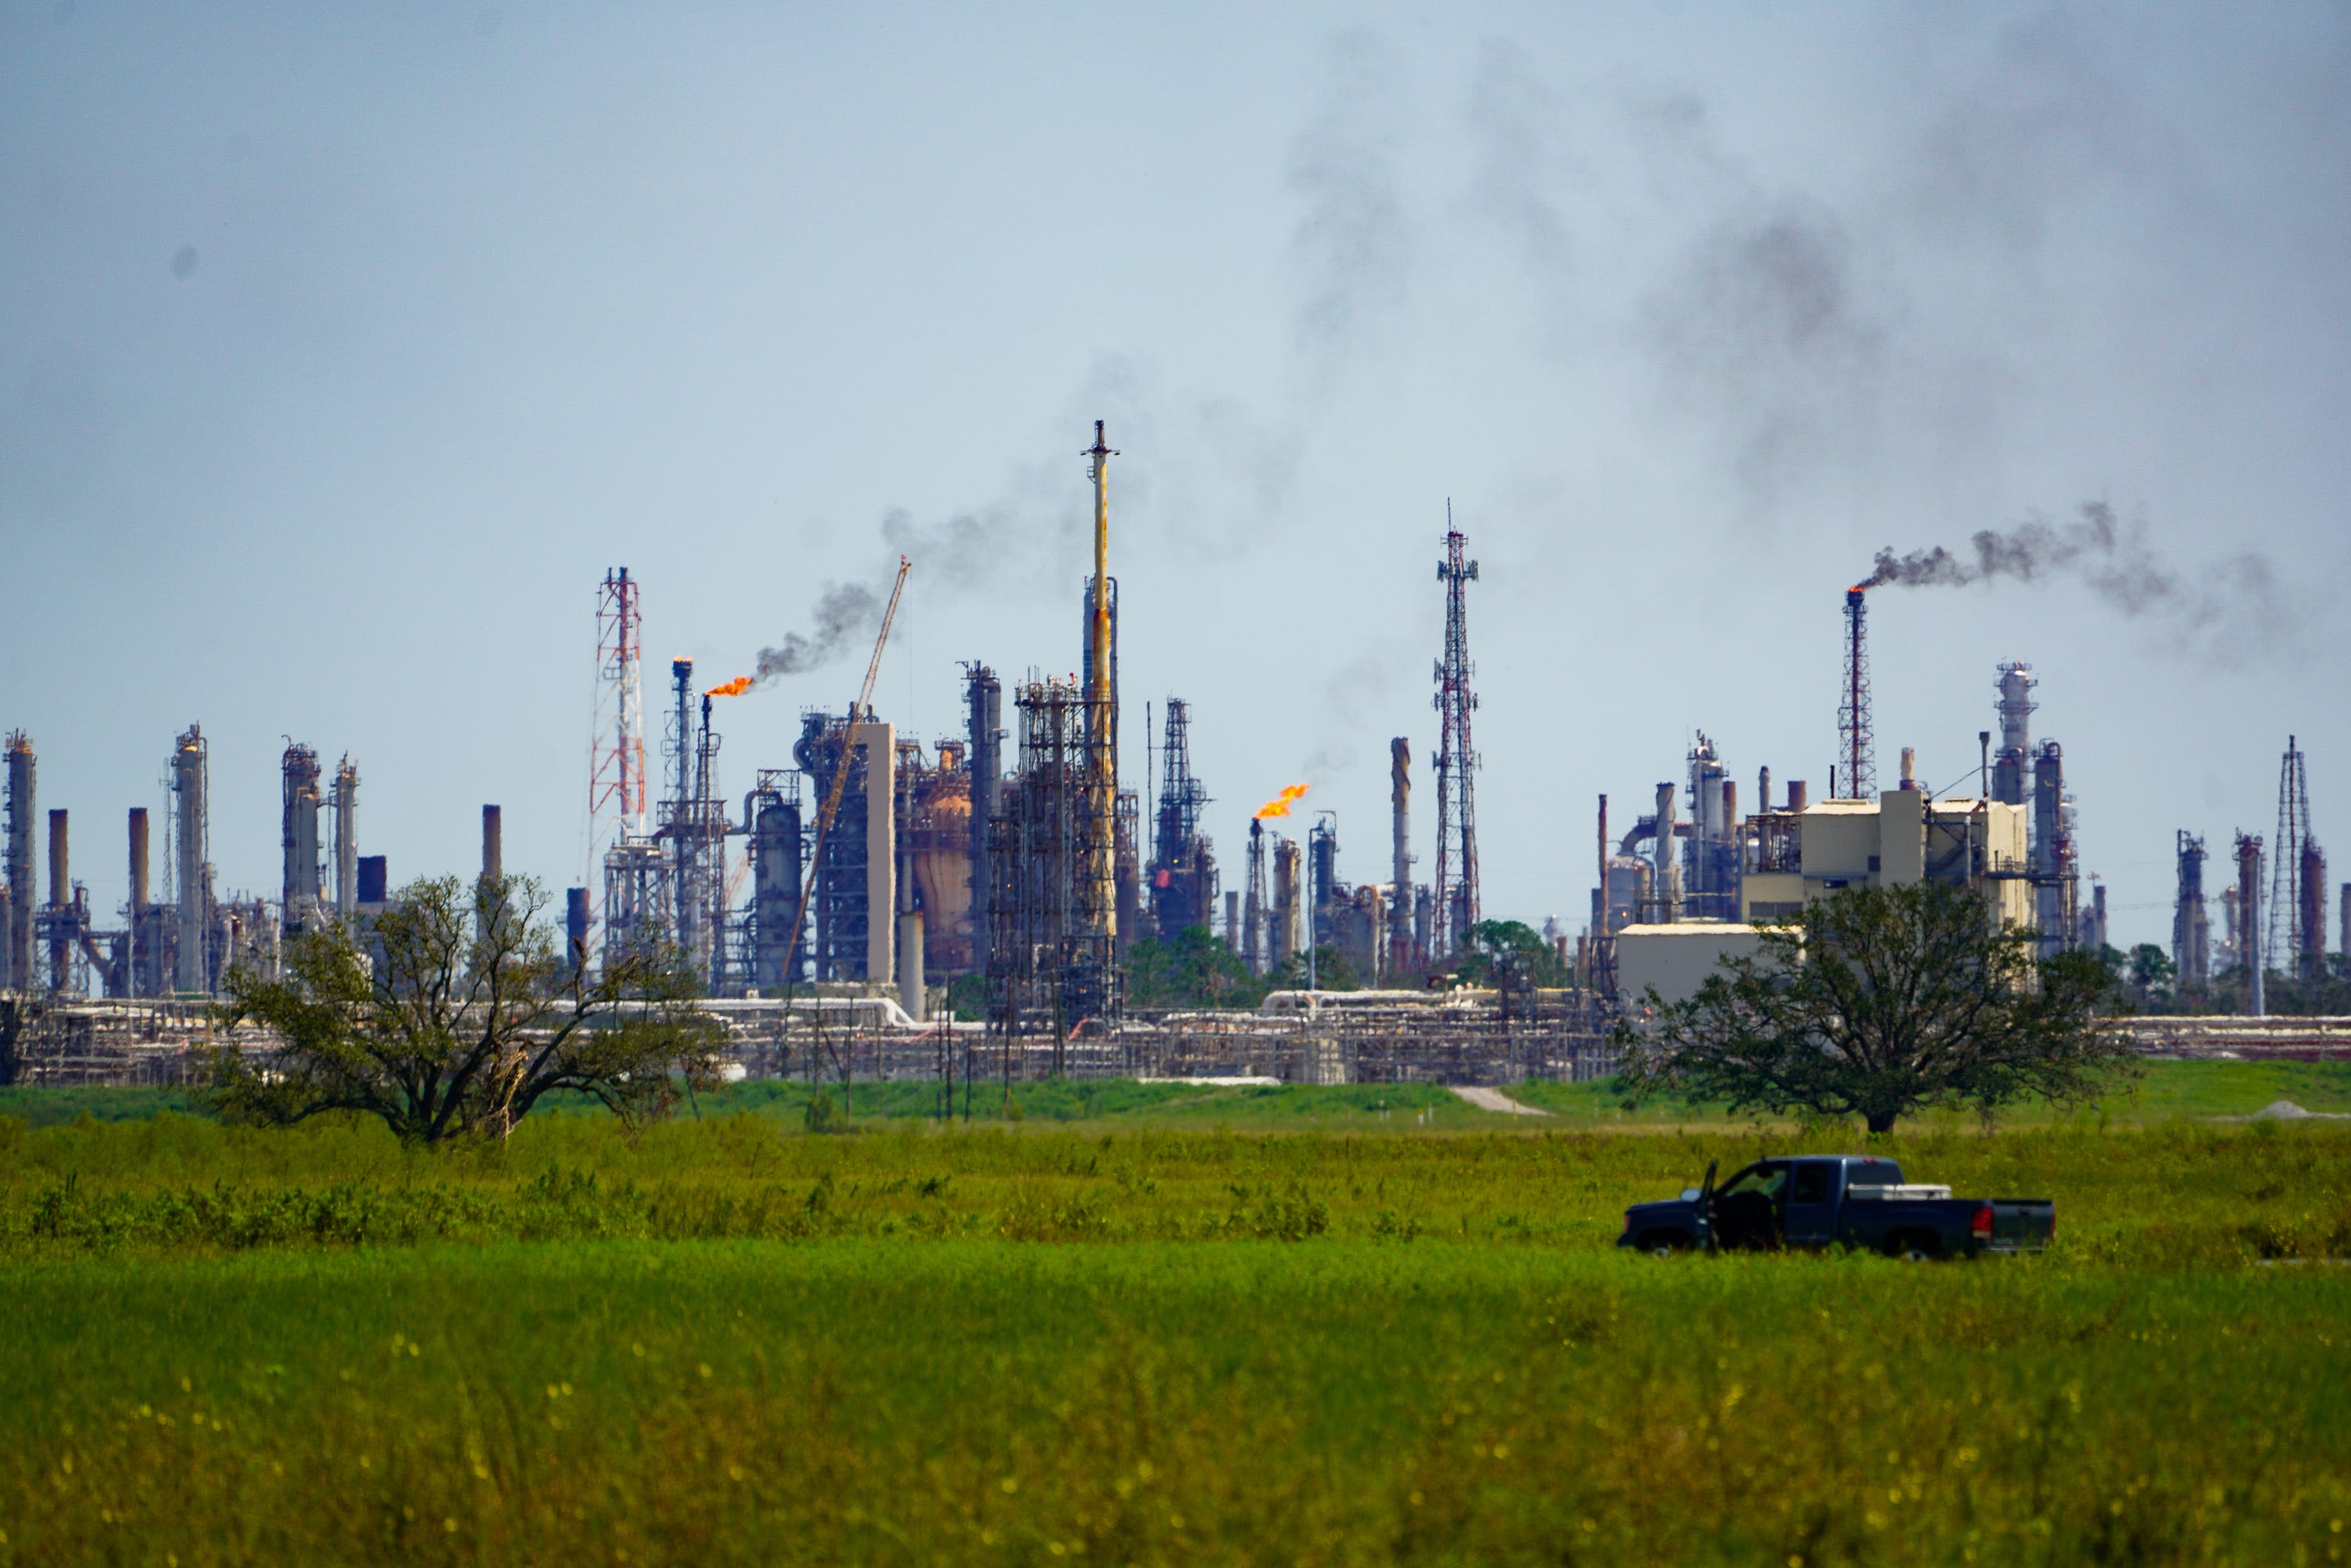 Louisiana ranked worst state as pollution, poverty, violence among factors in U.S. News report